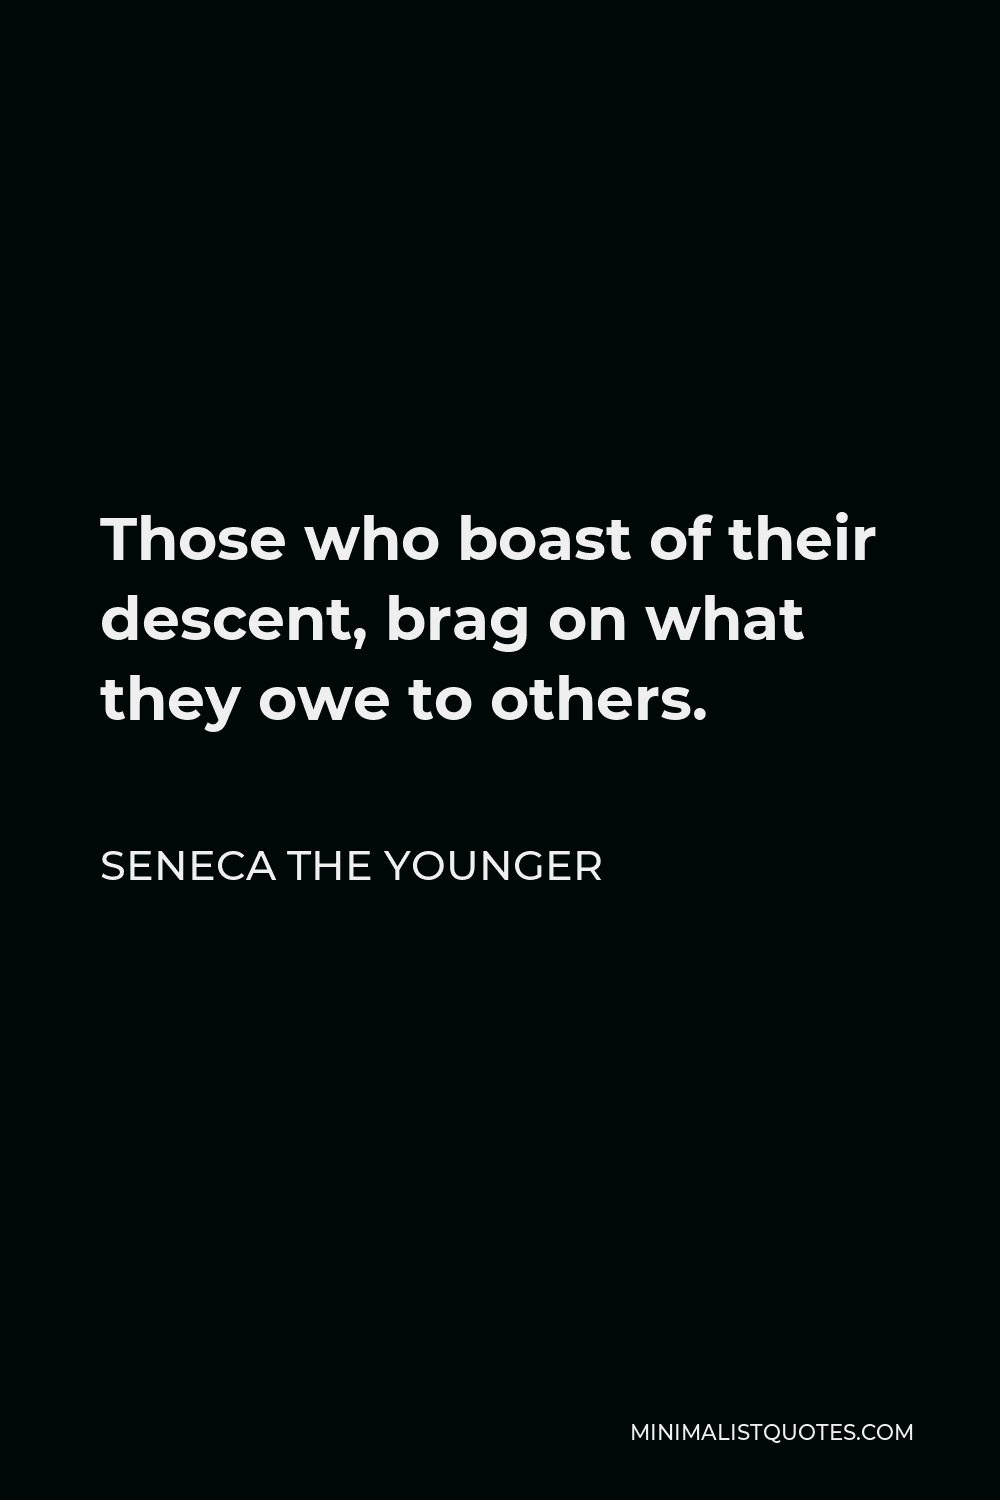 Seneca the Younger Quote - Those who boast of their descent, brag on what they owe to others.